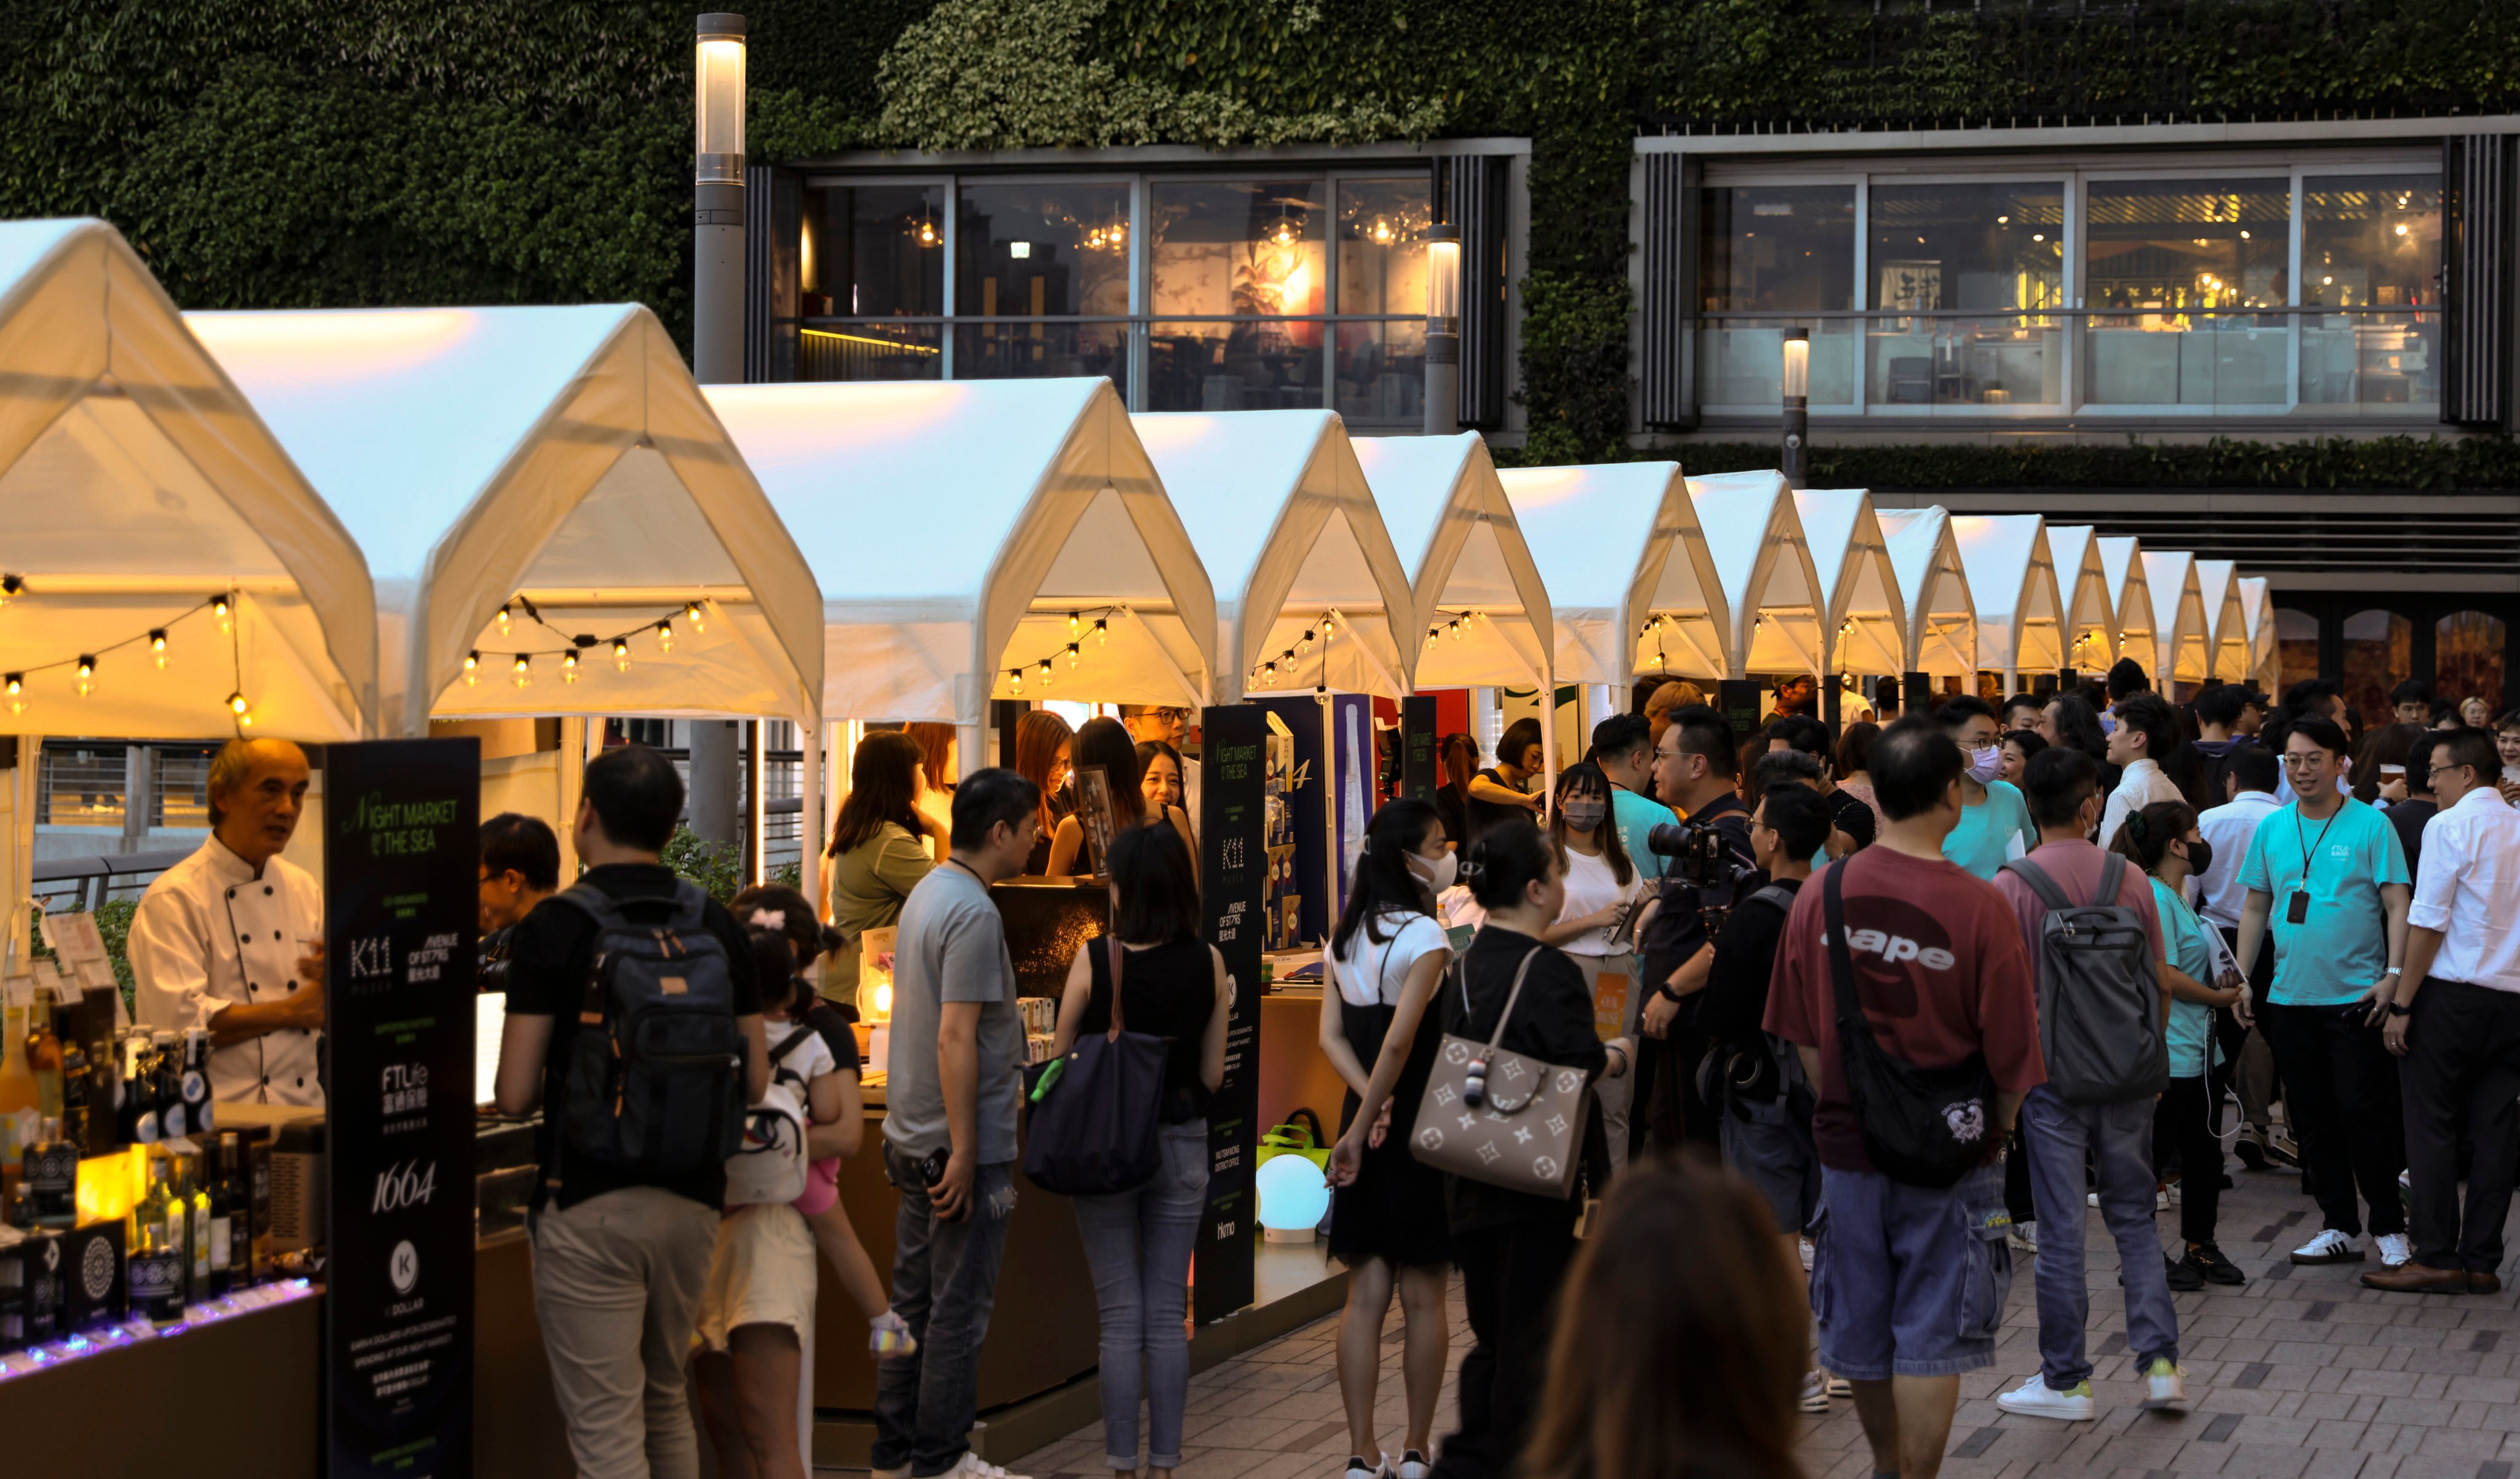 People visit the Night Market by the Sea at K11 Musea in Tsim Sha Tsui on September 22, as part of the government’s “Night Vibes Hong Kong” promotion to boost consumption. More than a status quo-orientated approach is needed to rejuvenate the economy. Photo: Yik Yeung-man